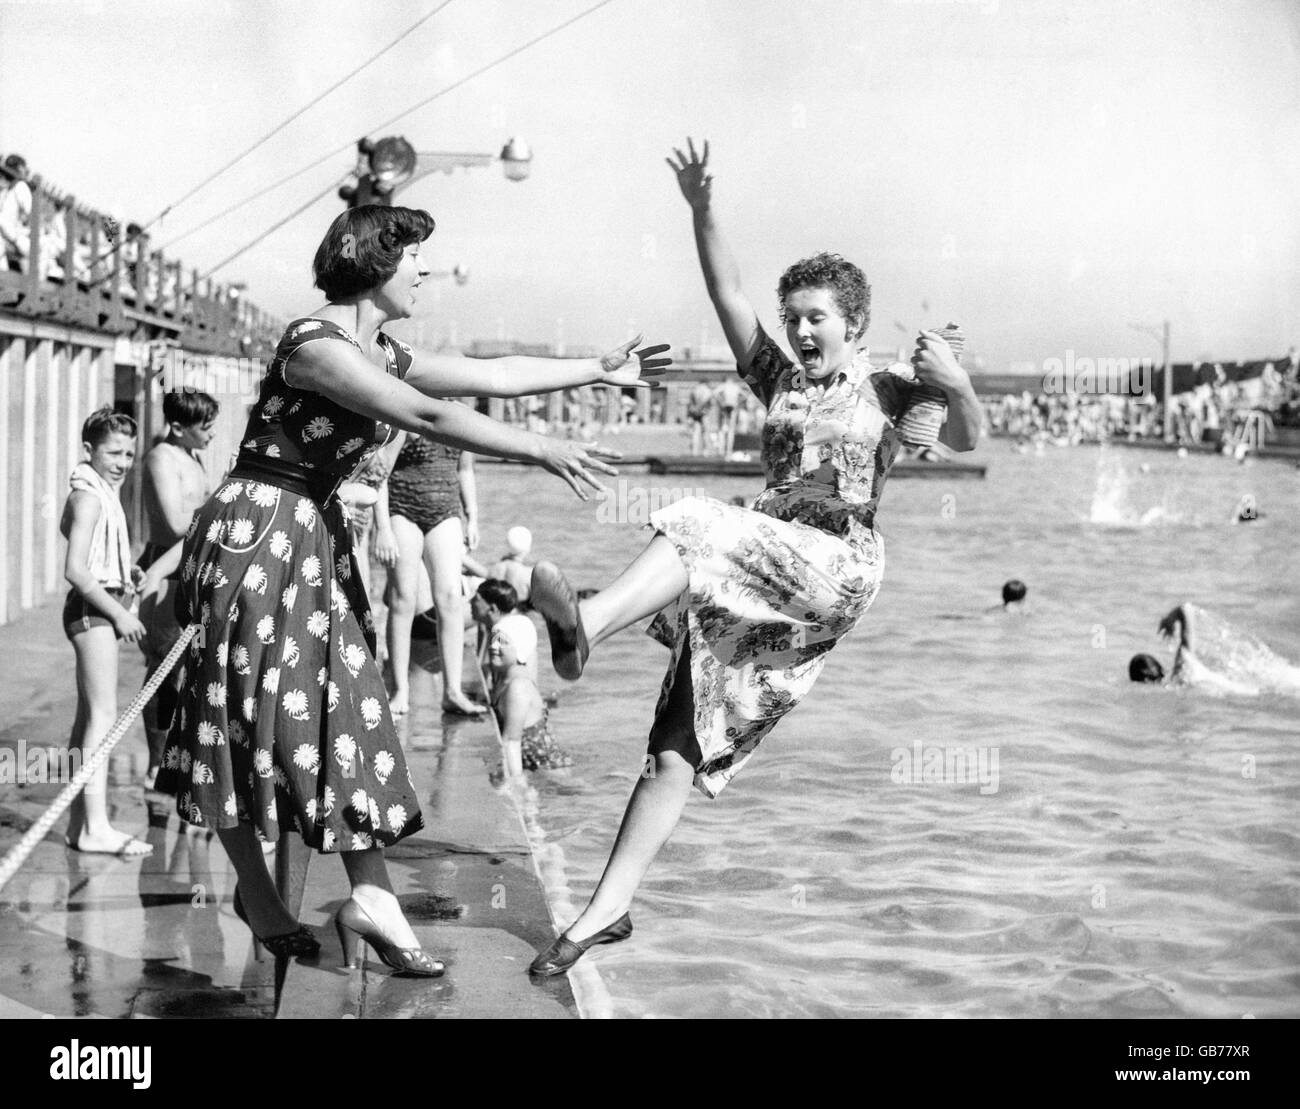 Anne Wilson is pictured at the bathing pool at Great Yarmouth taking a sudden backward plunge, but she runs no risk of drowning as she is testing the new bouyant swimsuit. The swimsuit is the invention of Mark Shaw, which has air panels to keep the wearer afloat face-up. Stock Photo